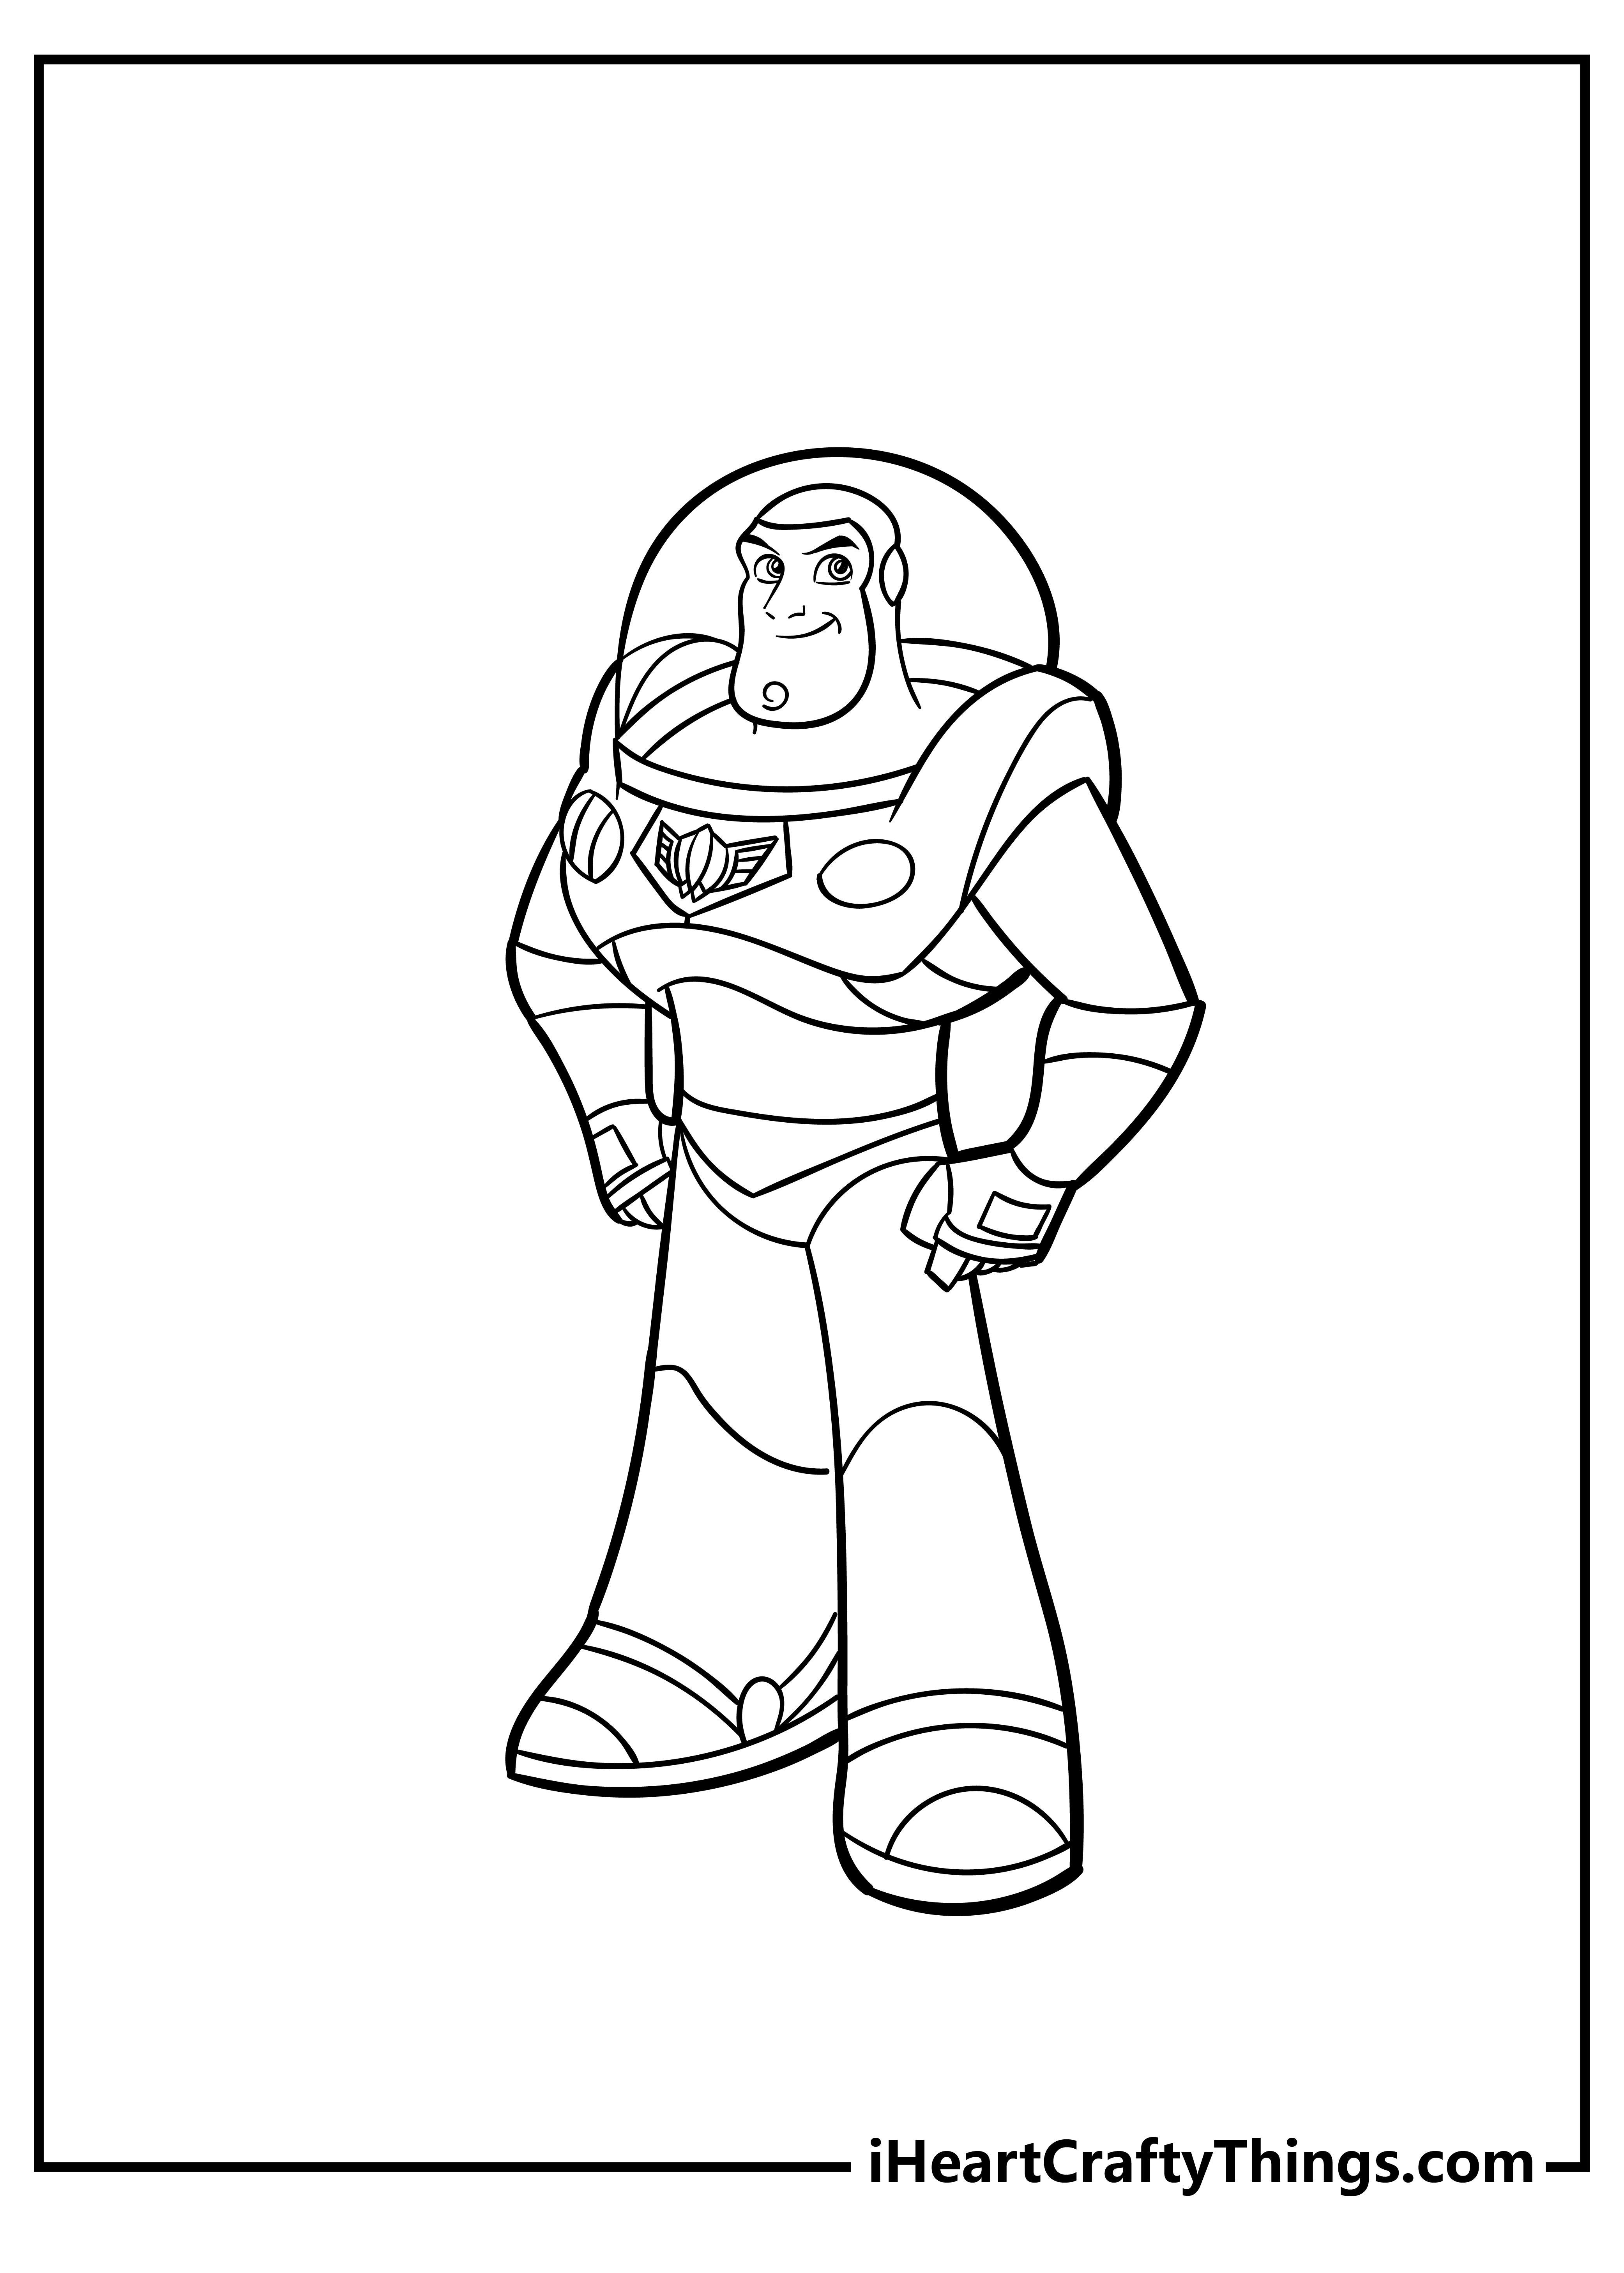 Buzz Lightyear Cartoon Coloring Pages free pdf download